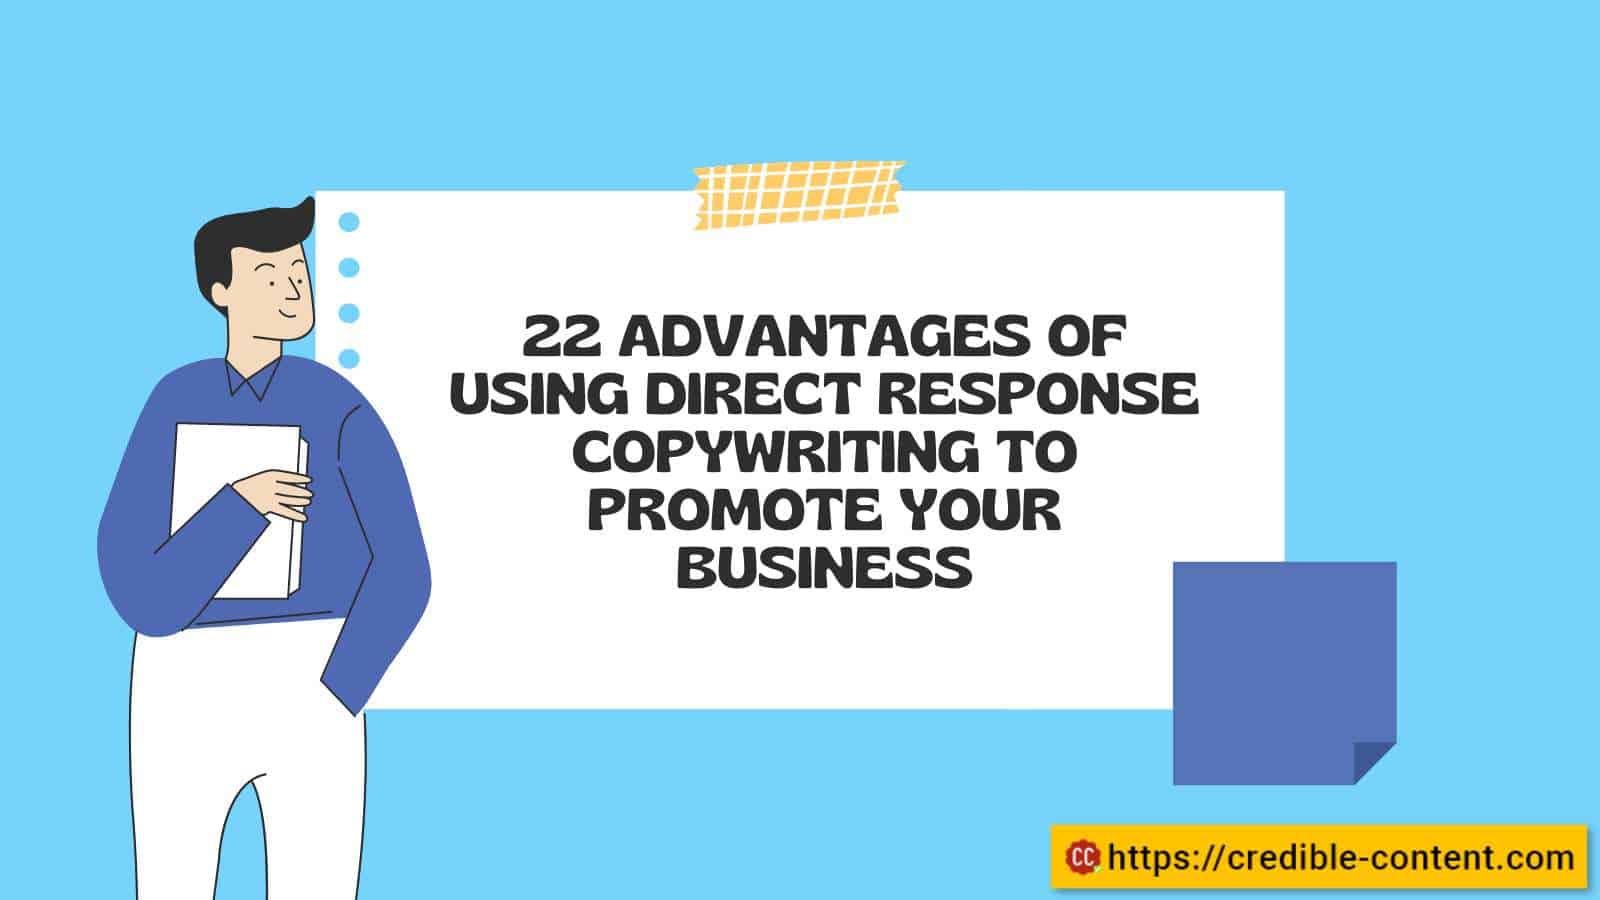 22 advantages of using direct response copywriting to promote your business